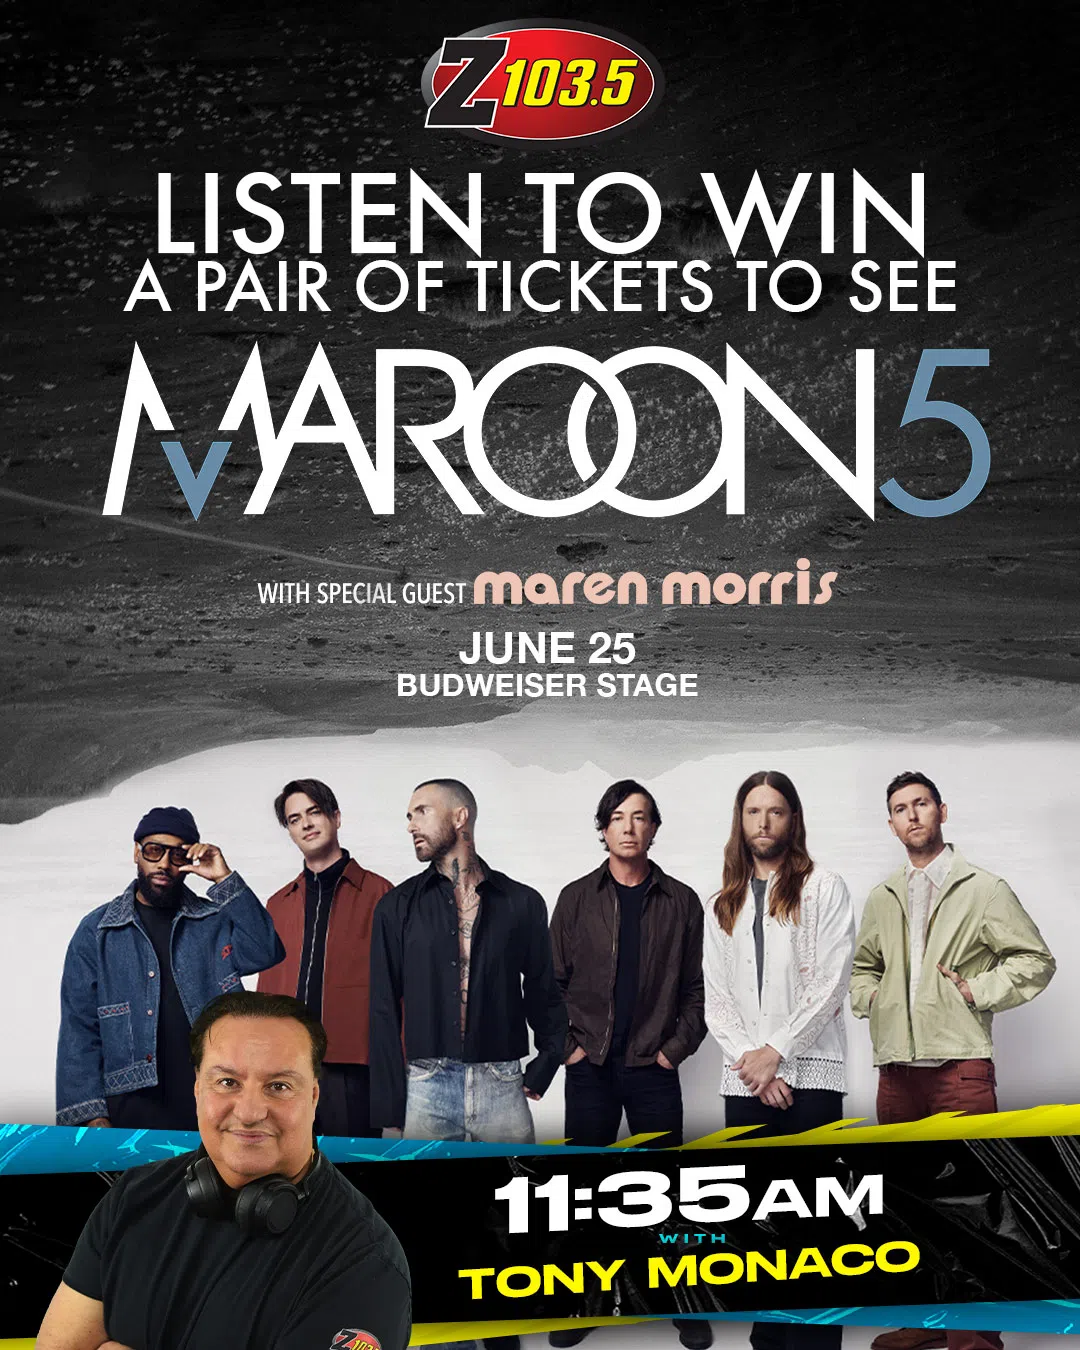 Feature: https://z1035.com/win/win-tickets-to-see-maroon-5/